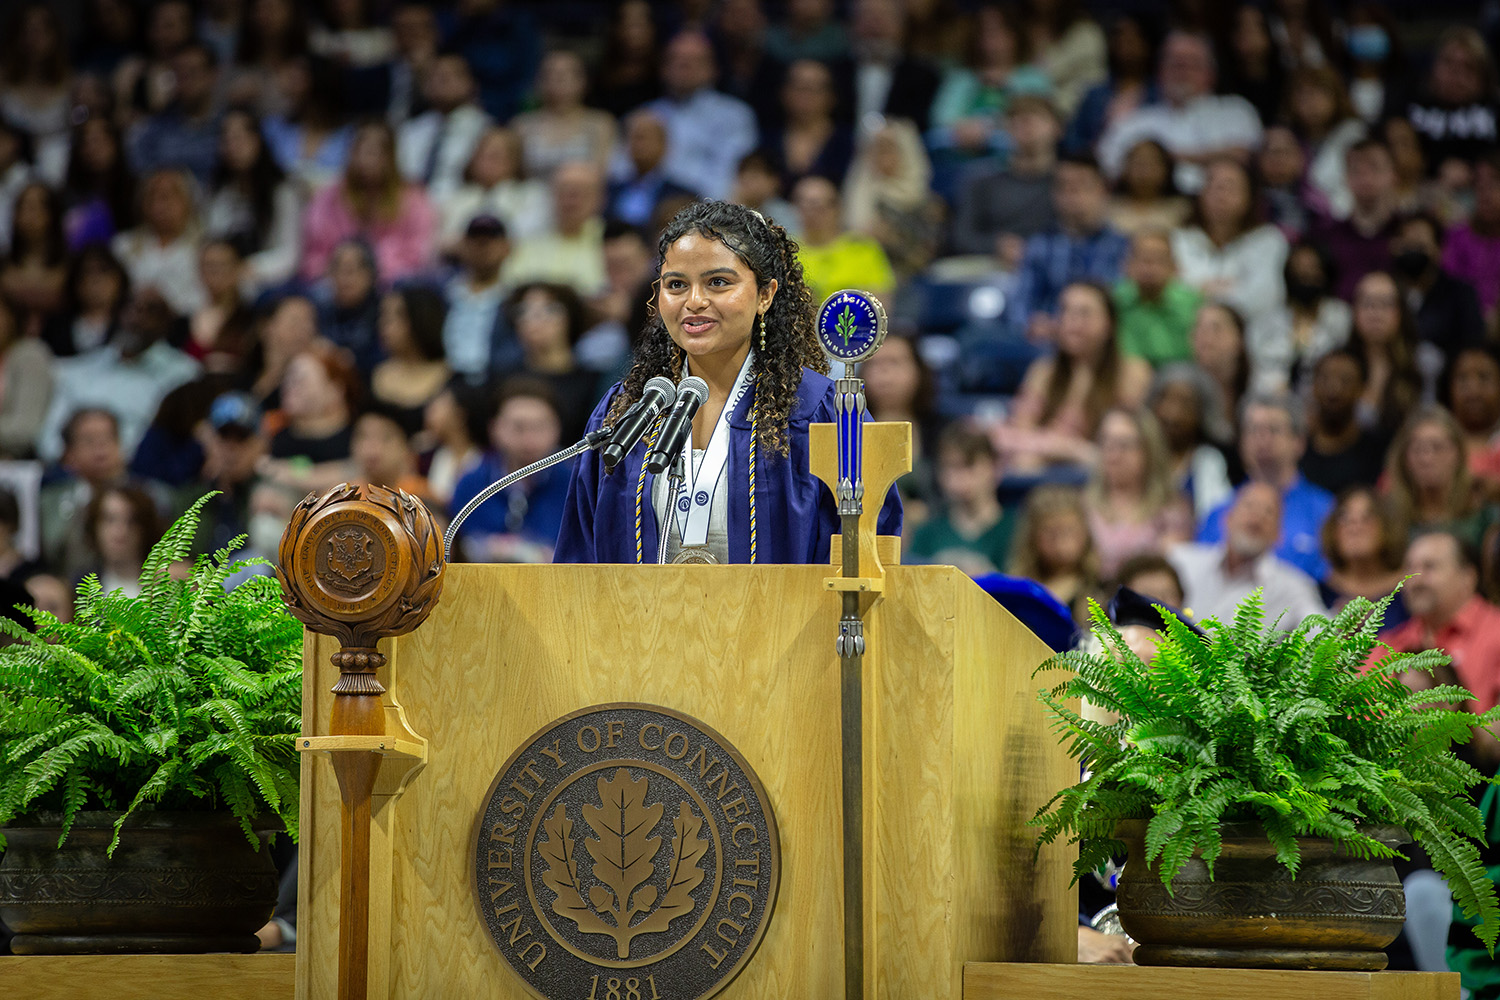 Nidhi Nair ’23 stands behind podium during commencement.